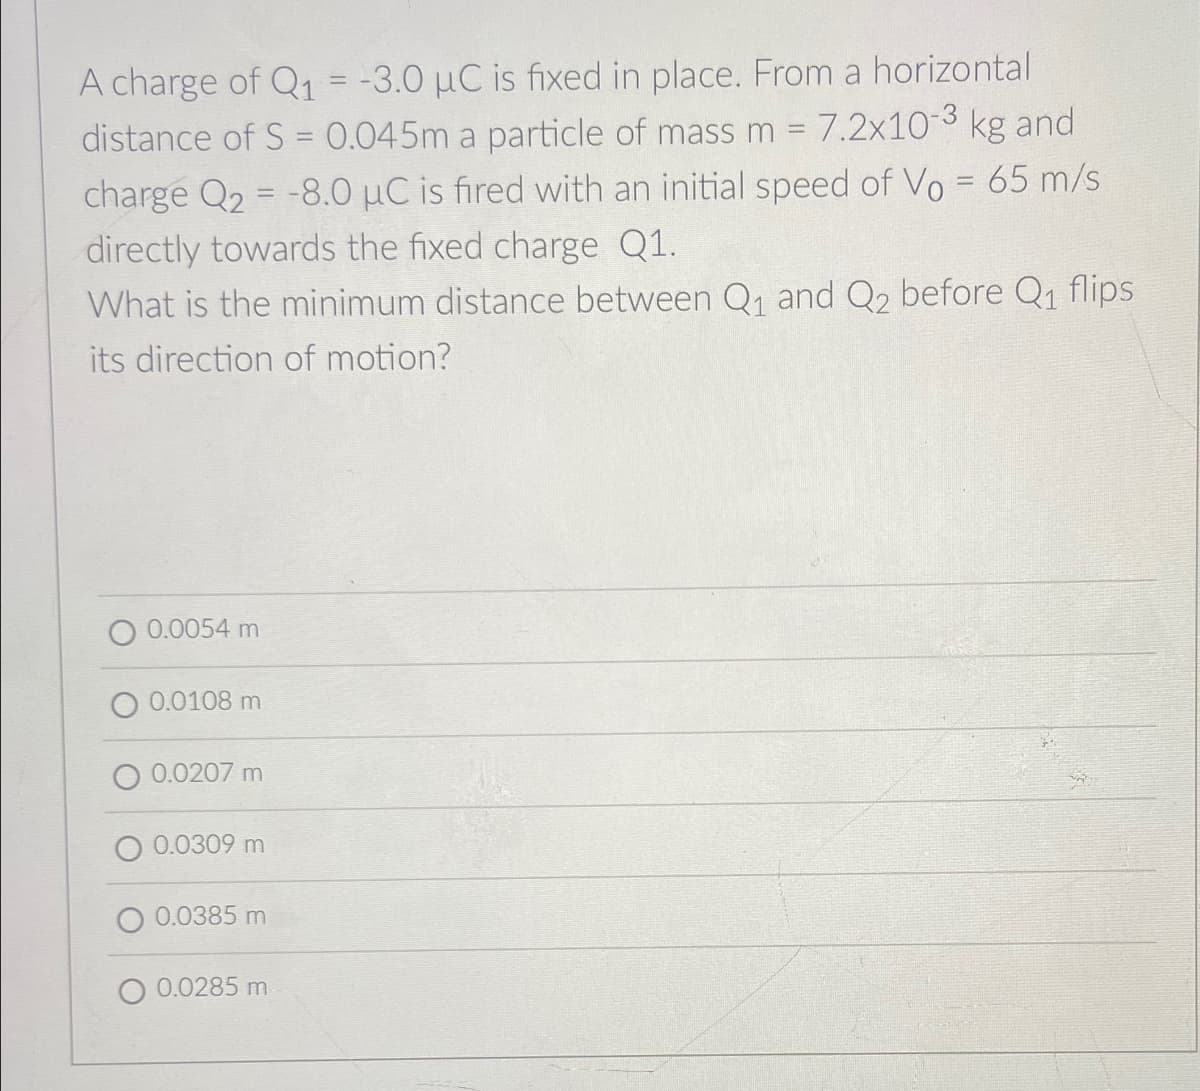 A charge of Q1 = -3.0 µC is fixed in place. From a horizontal
distance of S = 0.045m a particle of mass m 7.2x103 kg and
charge Q2 = -8.0 µC is fired with an initial speed of Vo = 65 m/s
directly towards the fixed charge Q1.
What is the minimum distance between Q1 and Q2 before Q1 flips
%3D
its direction of motion?
O 0.0054 m
O 0.0108 m
O 0.0207 m
O 0.0309 m
0.0385 m
O 0.0285 m
